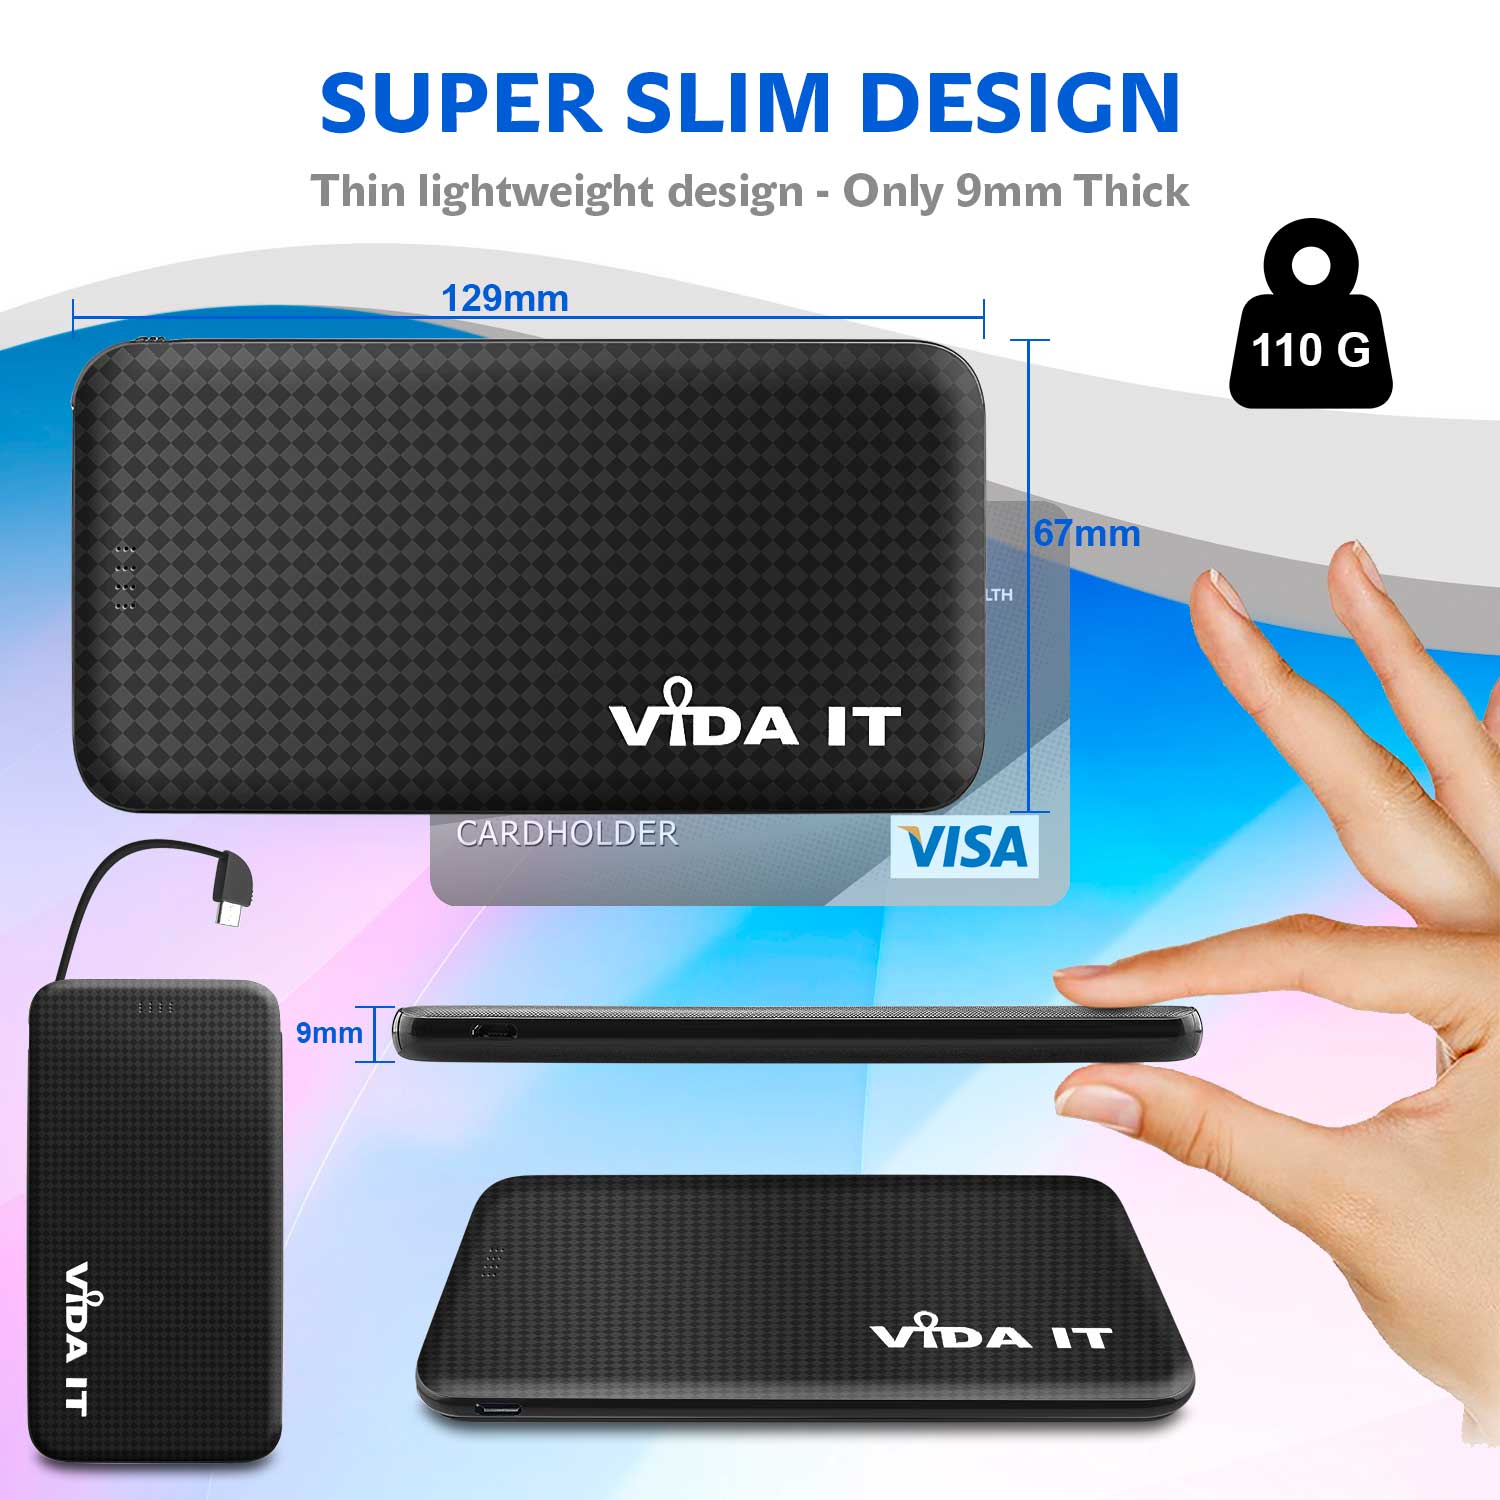 V502 Slim 9mm Dual Port 5000mAh Power Bank Portable External Emergency Battery Pack USB Charger with Built-in Micro USB cable plus Apple-and USB-C Adapters in Black Colour